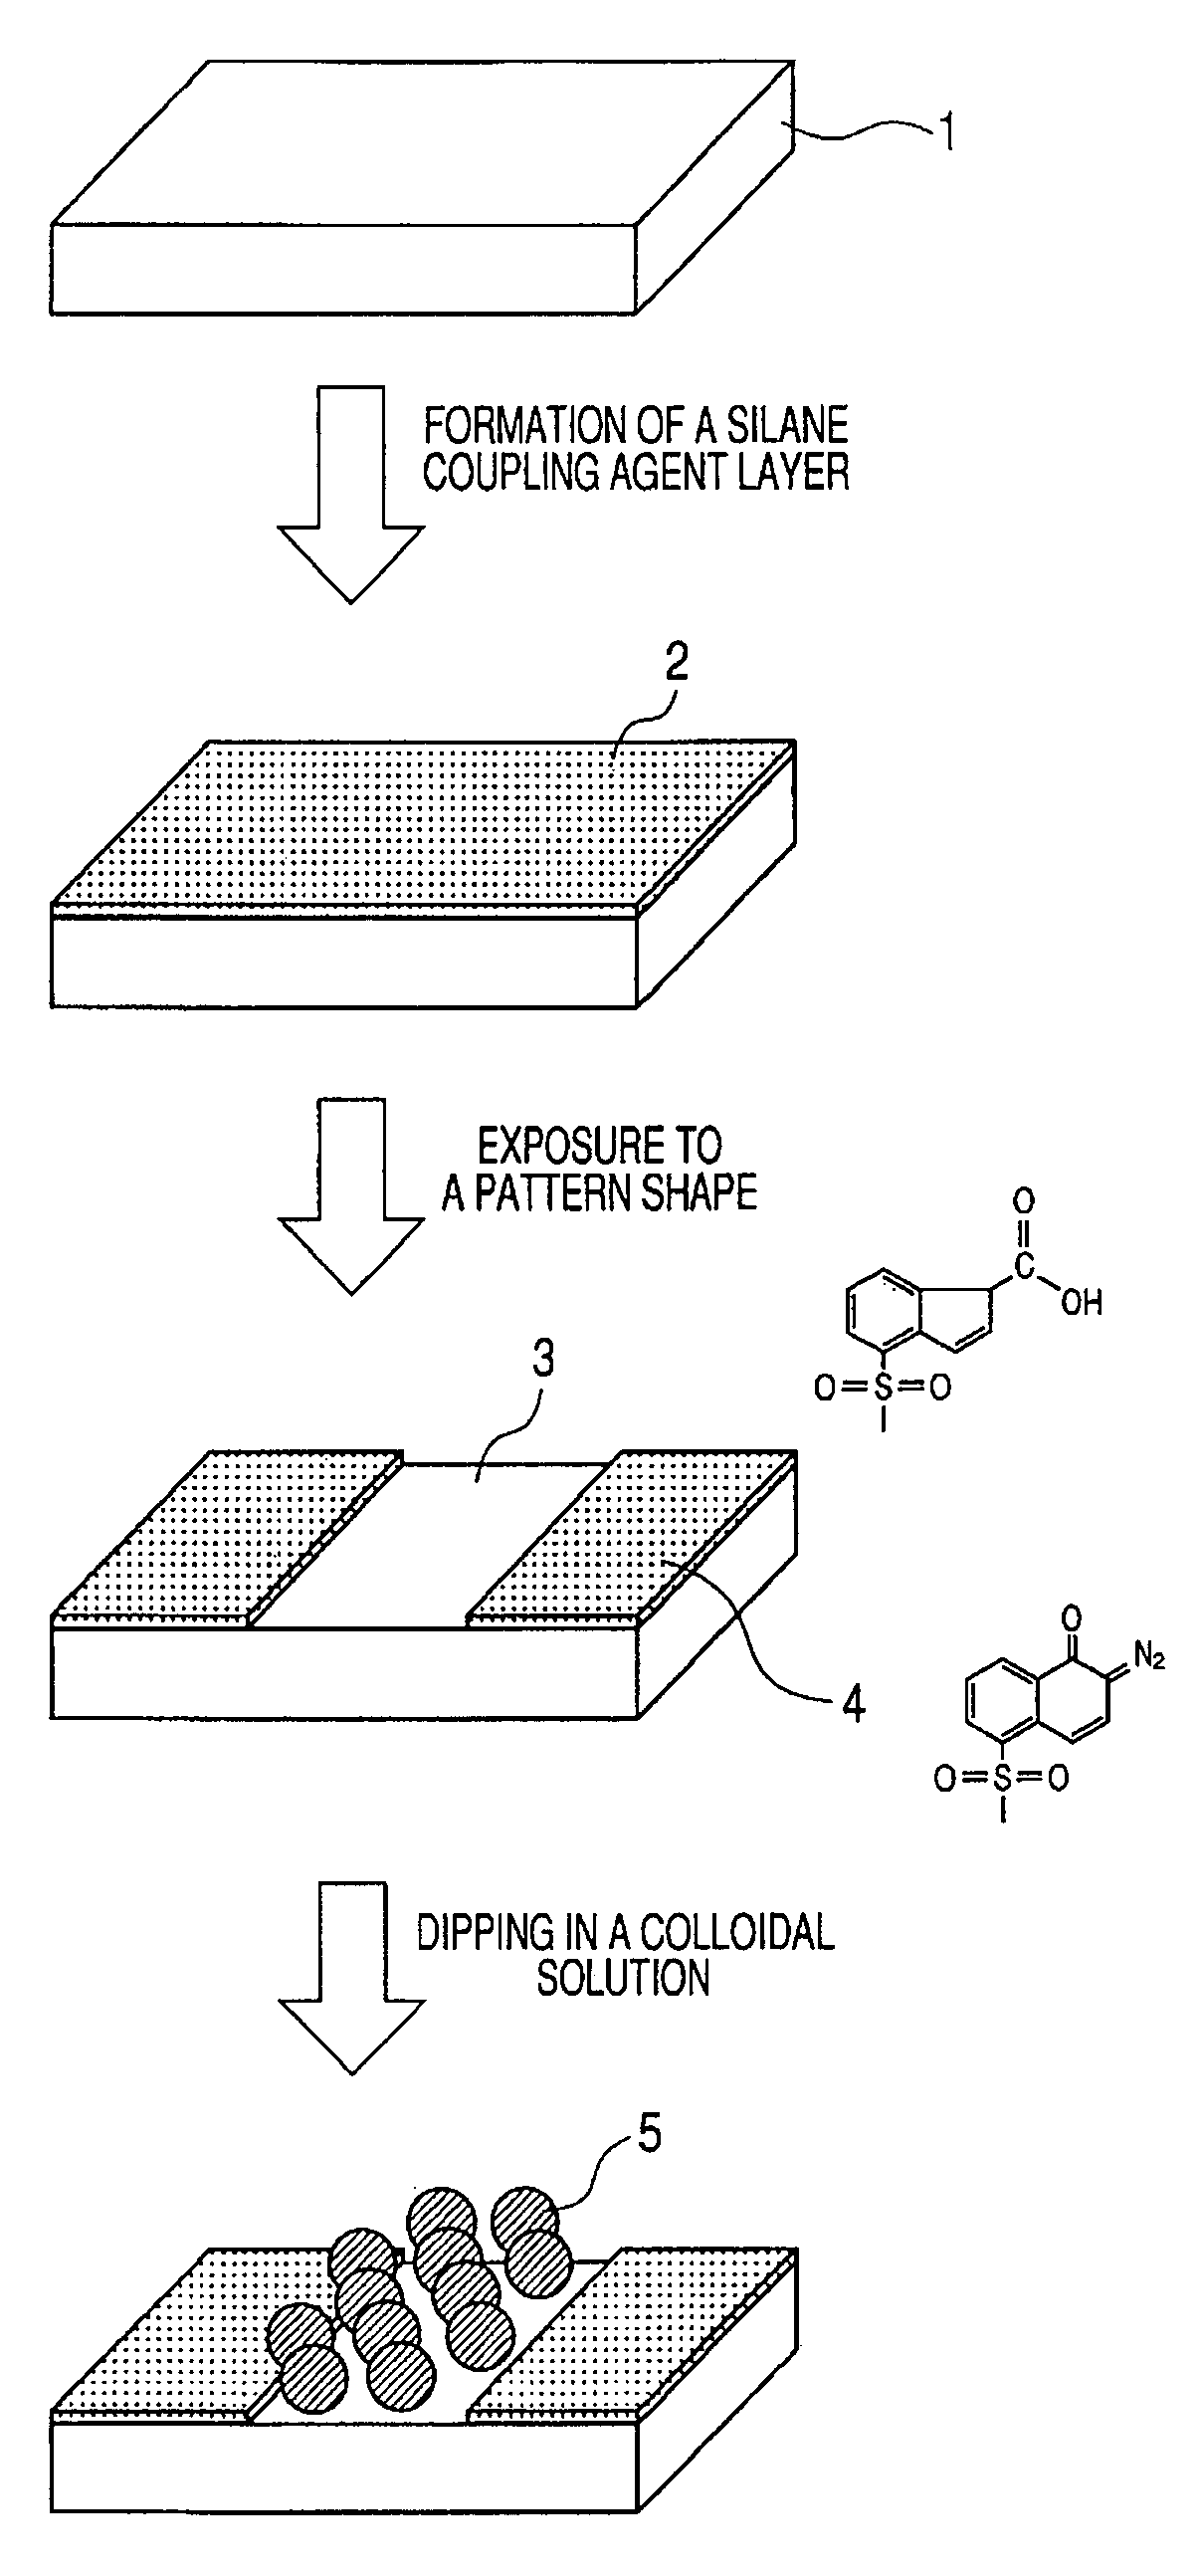 Photosensitive silane coupling agent, method of modifying surface, method of forming pattern, and method of fabricating device